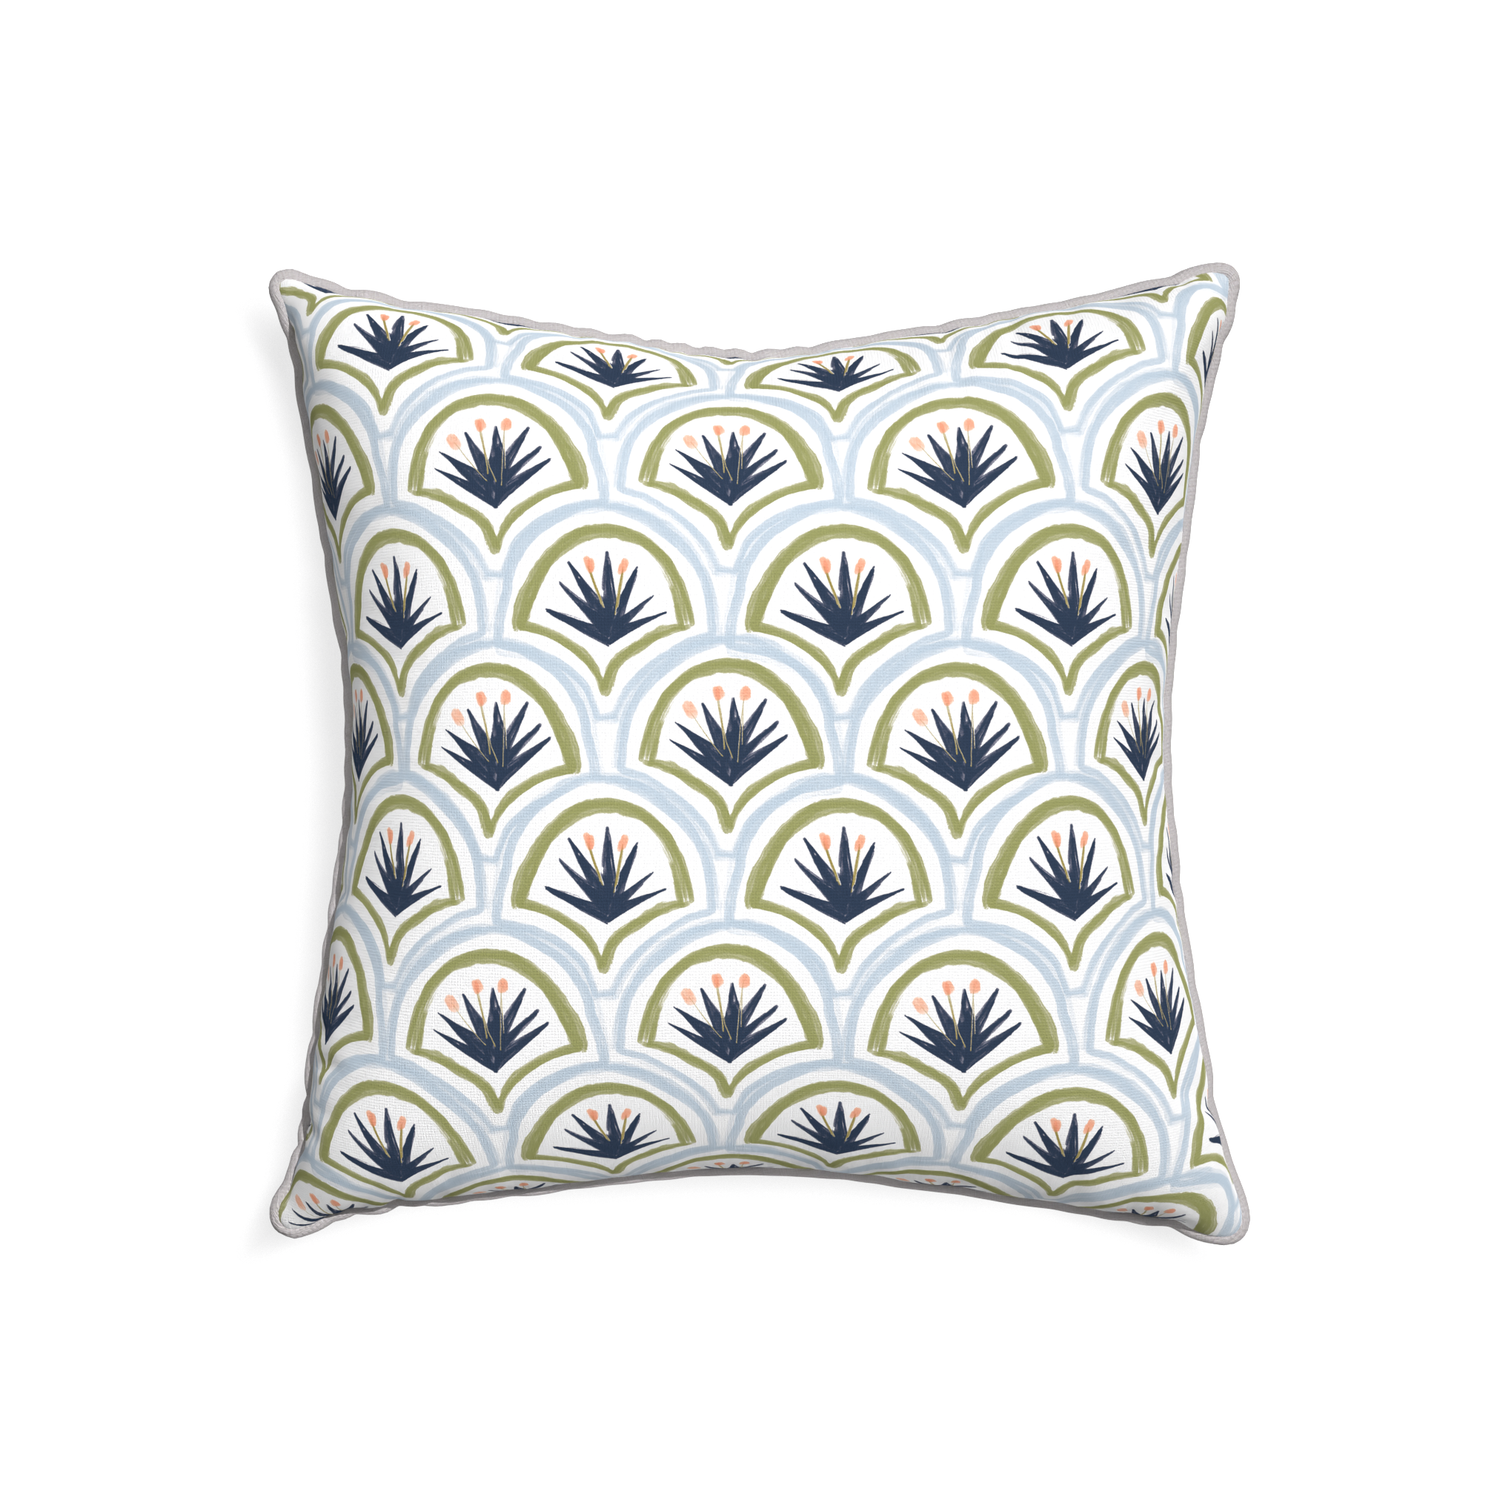 22-square thatcher midnight custom art deco palm patternpillow with pebble piping on white background